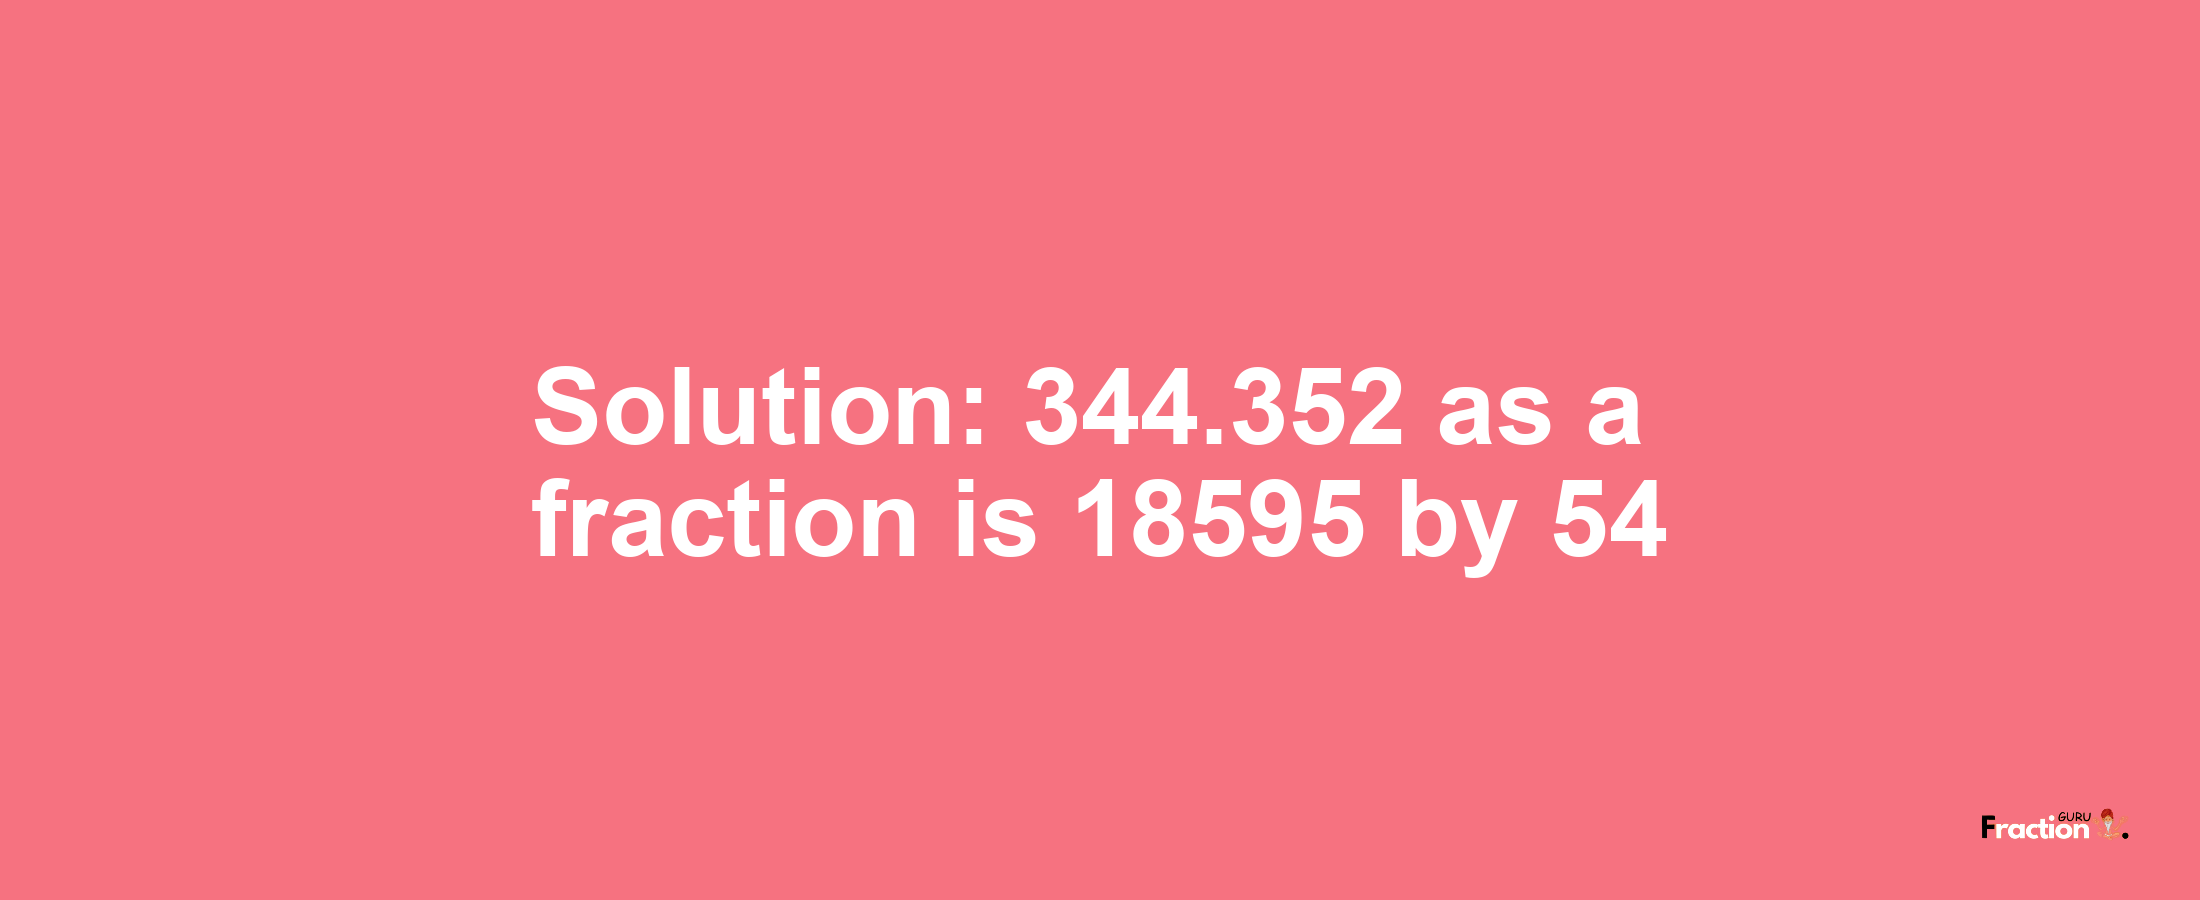 Solution:344.352 as a fraction is 18595/54